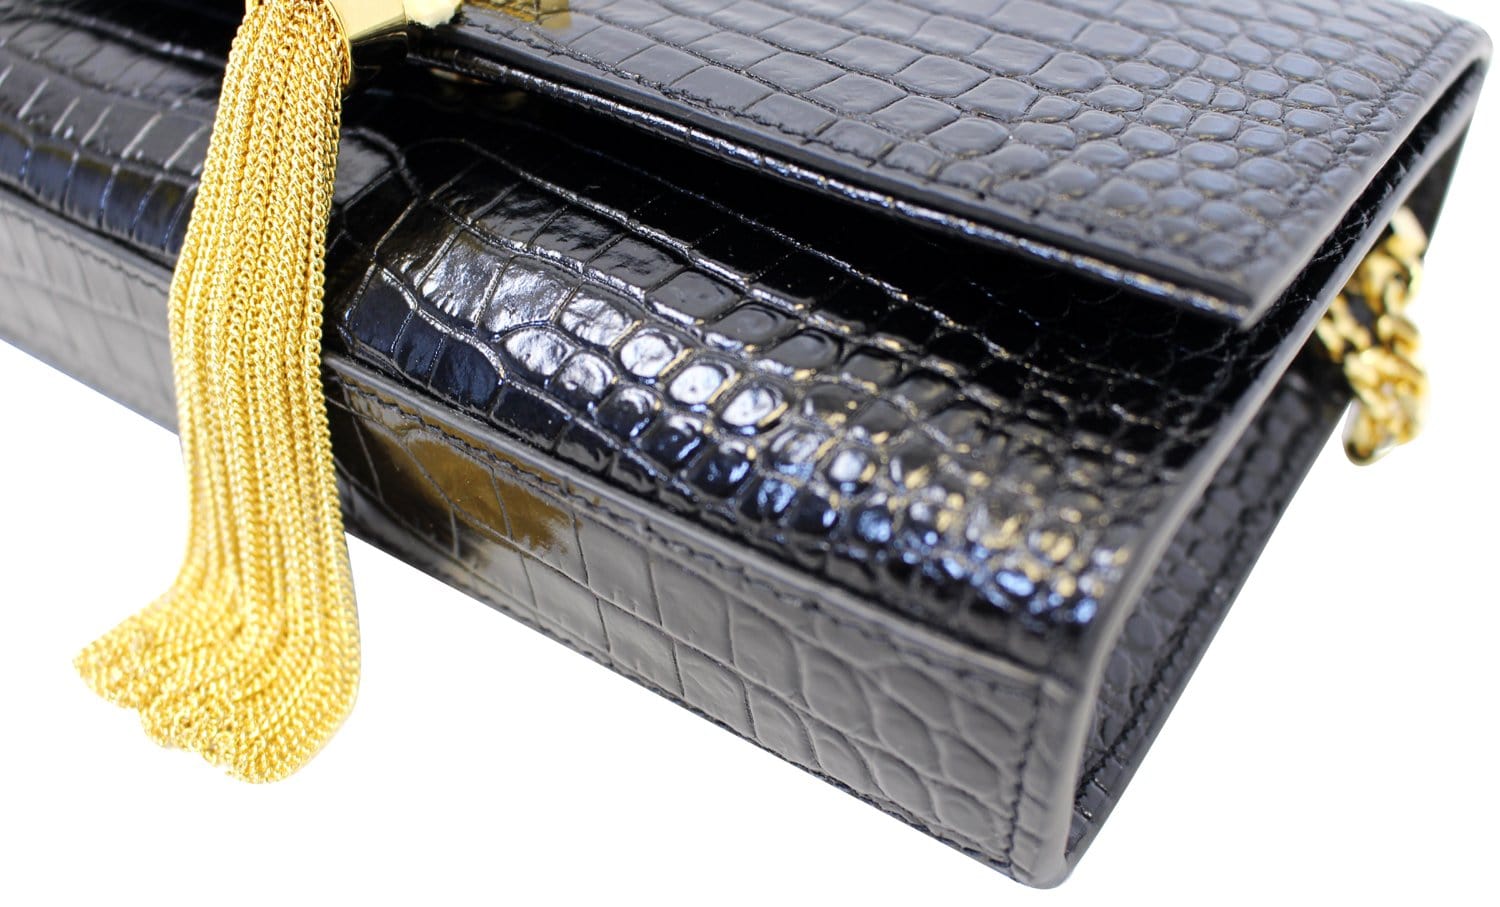 YVES SAINT LAURENT Crocodile Black Leather Silver Chain Clutch Crossbody  Bag for Sale in Billings, MT - OfferUp